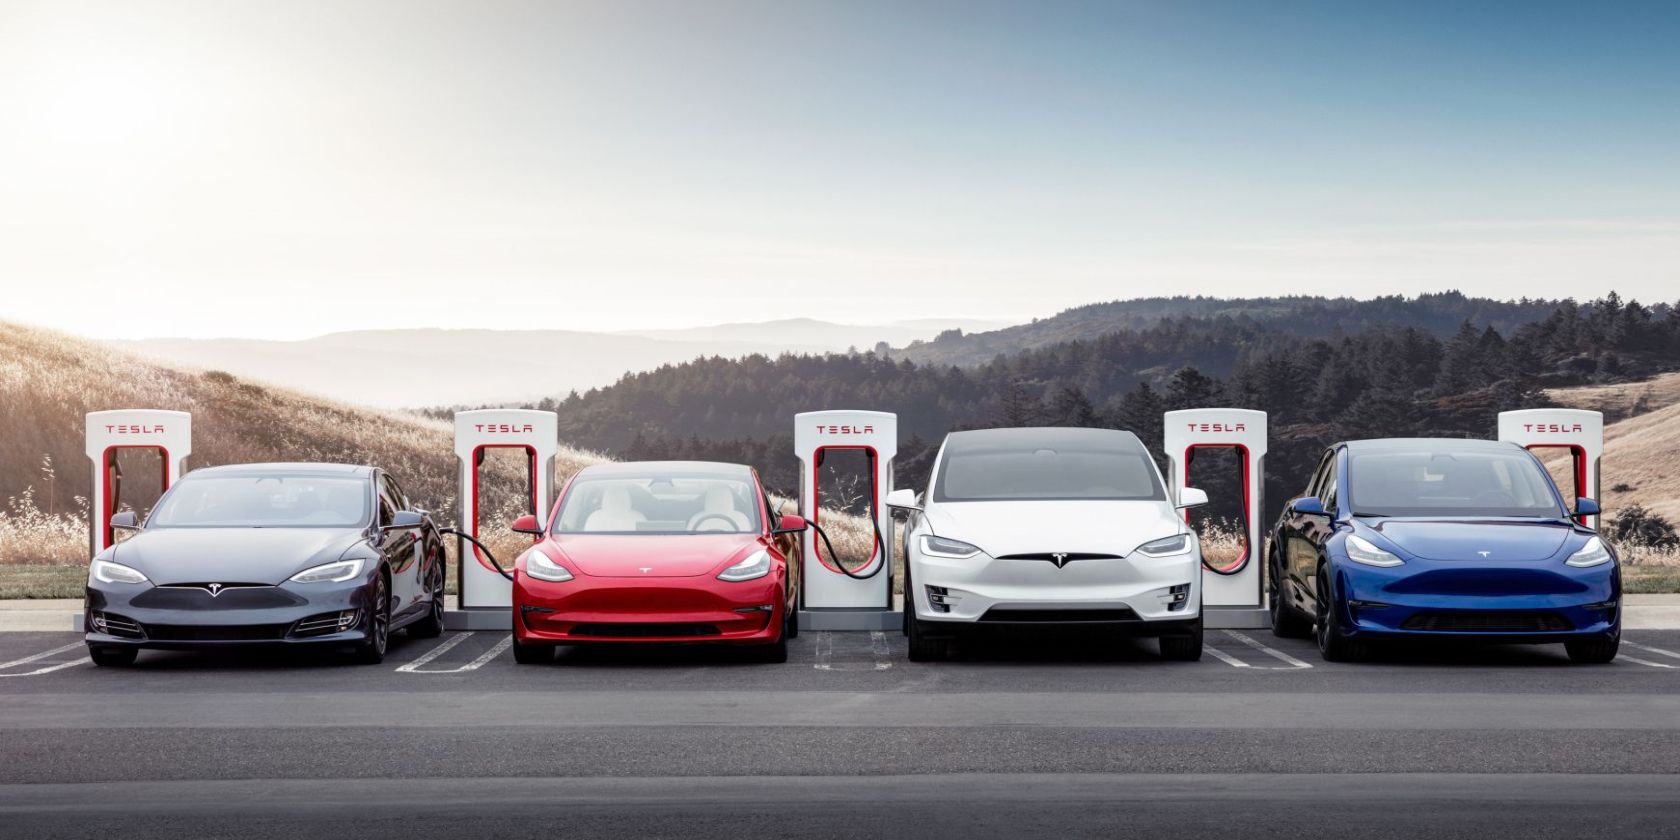 What Is a Tesla Supercharger and How Much Does It Cost to Use?